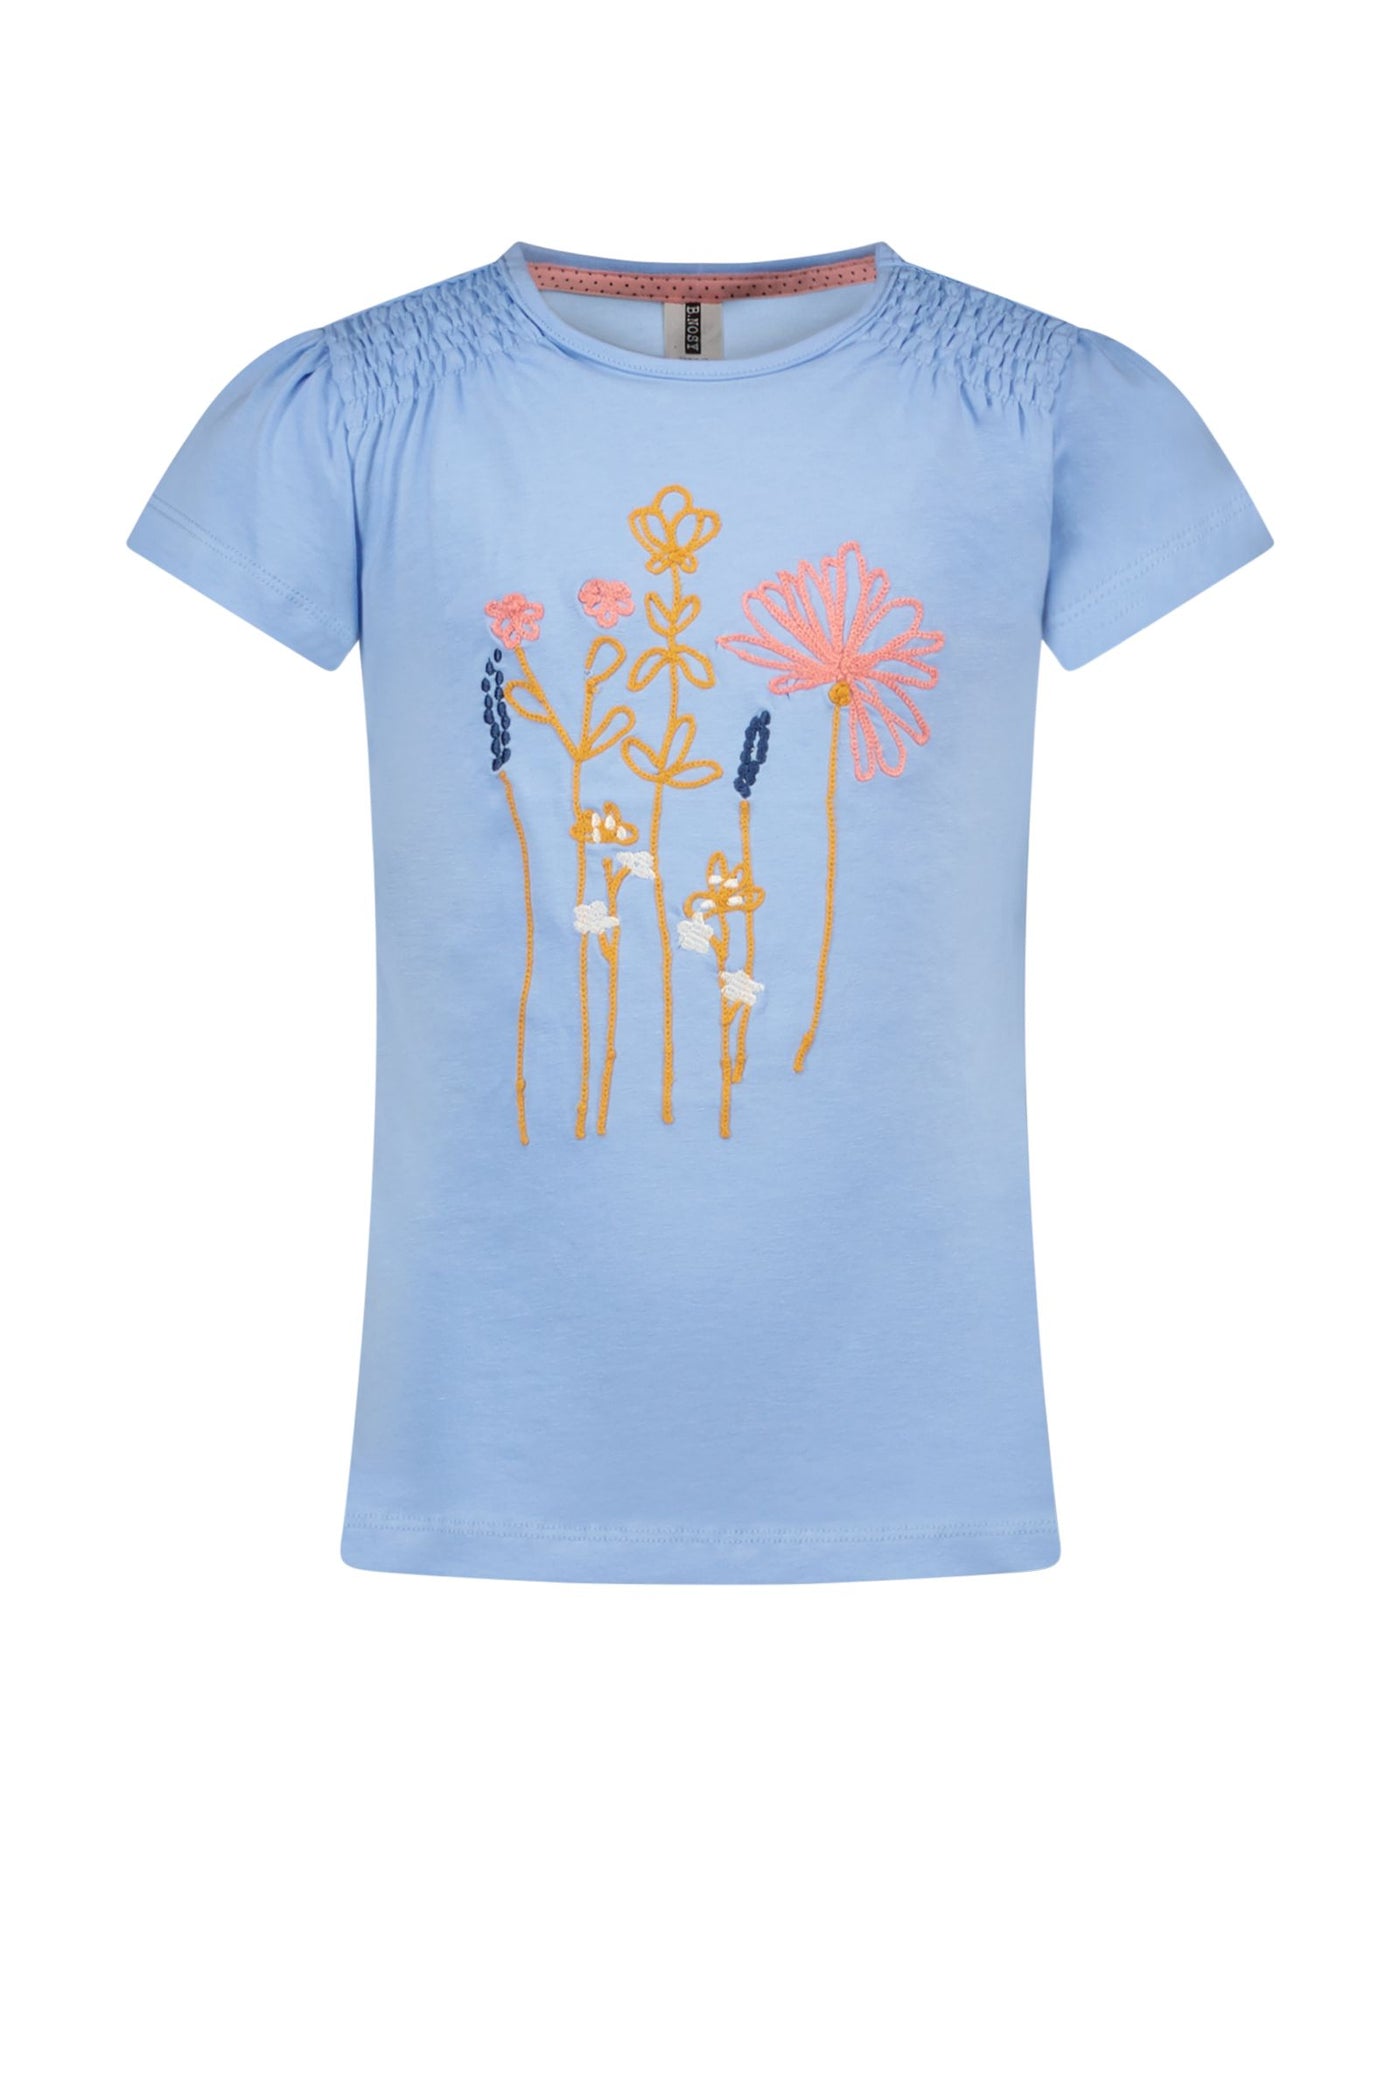 B-nosy - Girls short sleeve t-shirt with flower embroidery on chest - daisy white